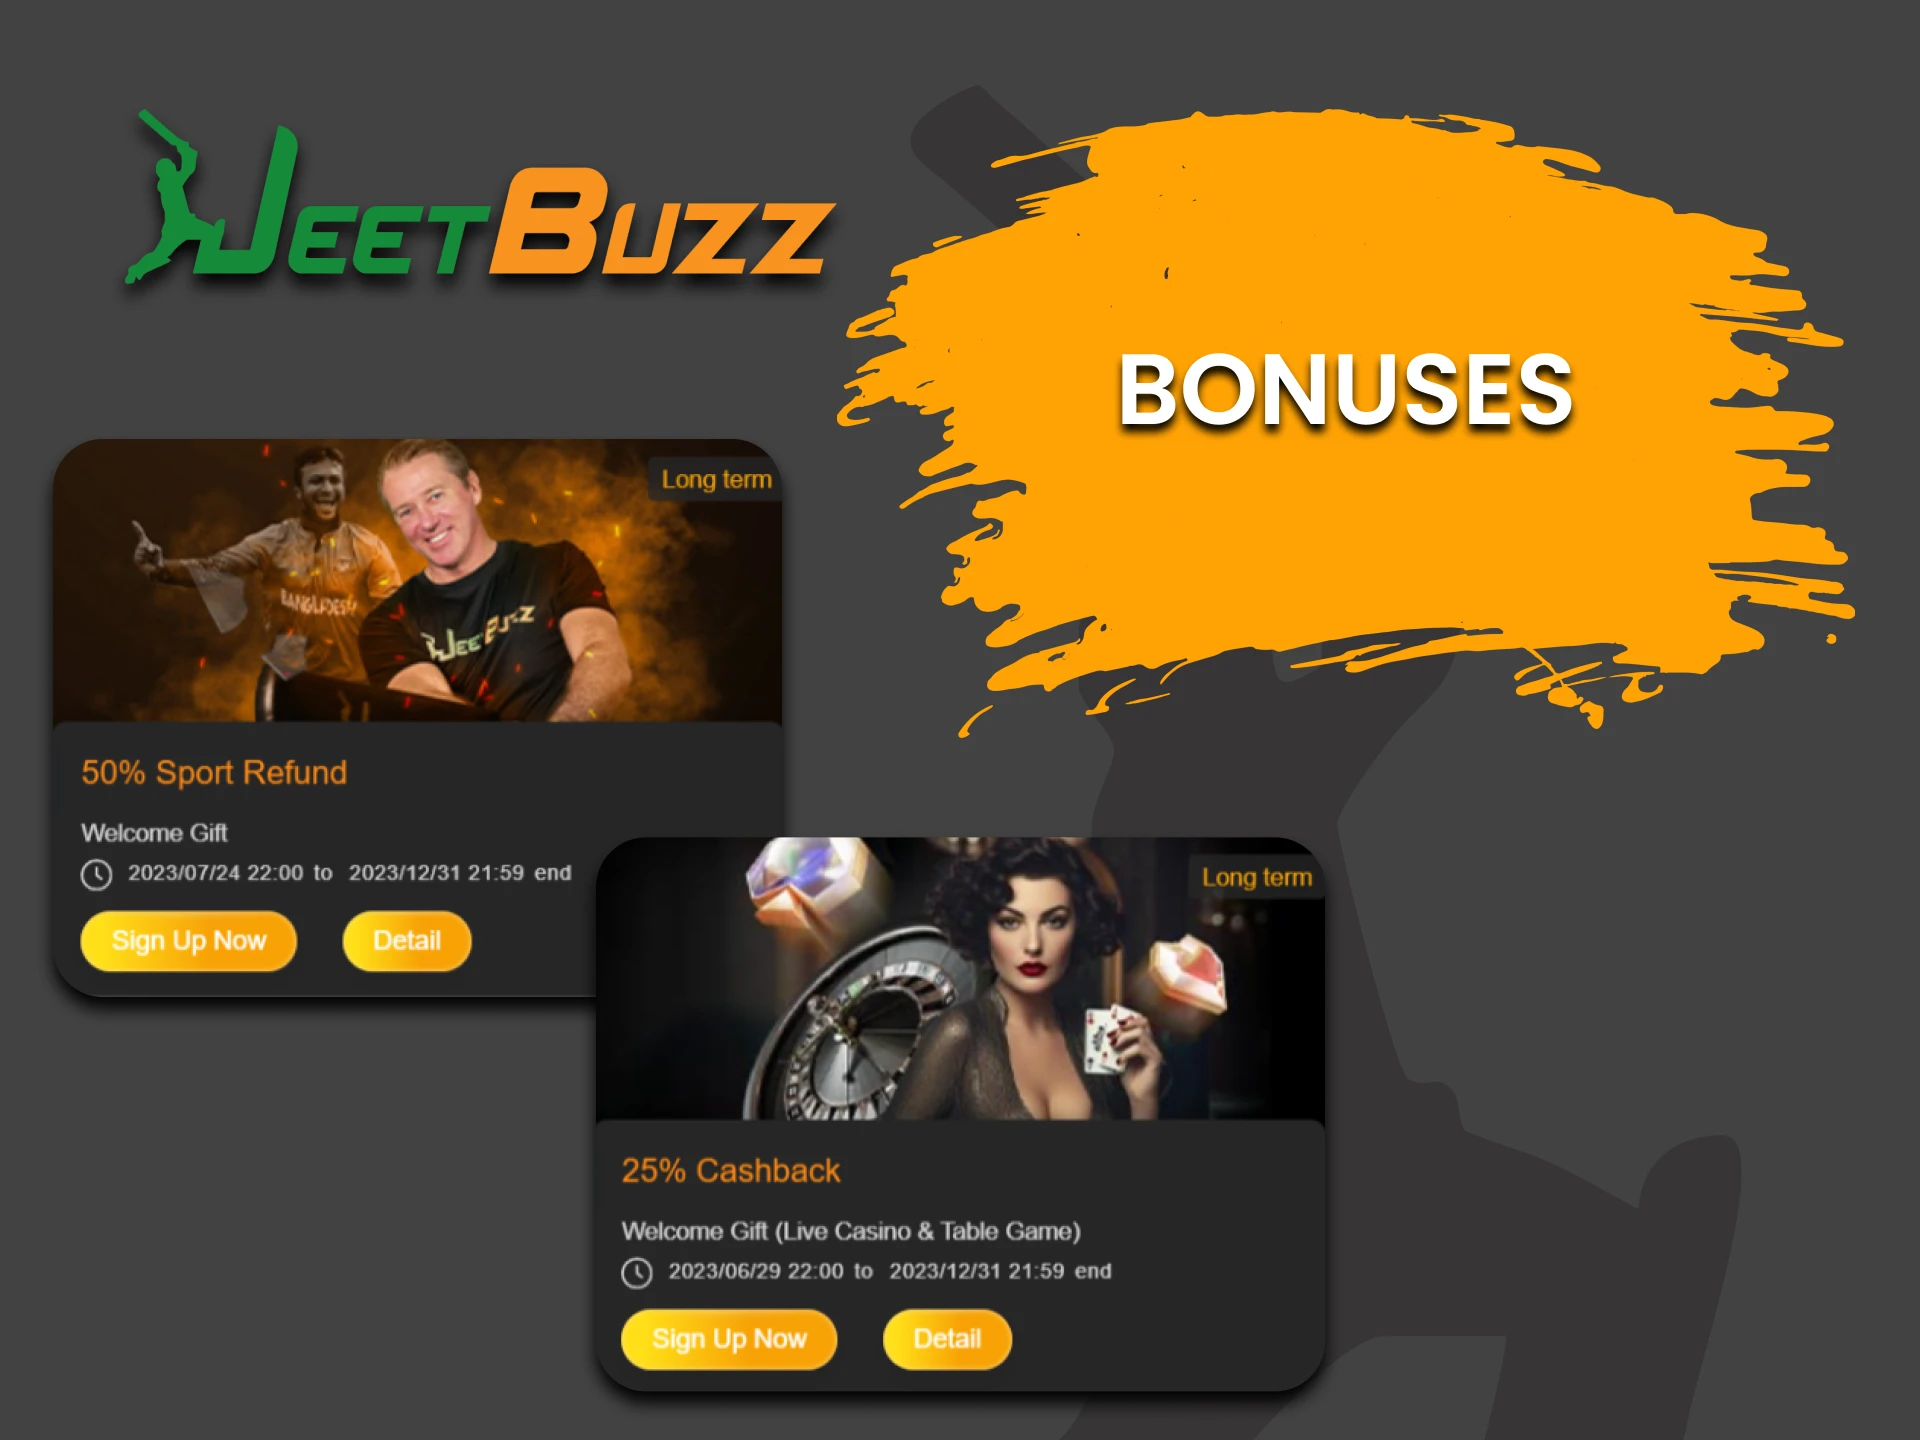 Learn about JeetBuzz bonuses.